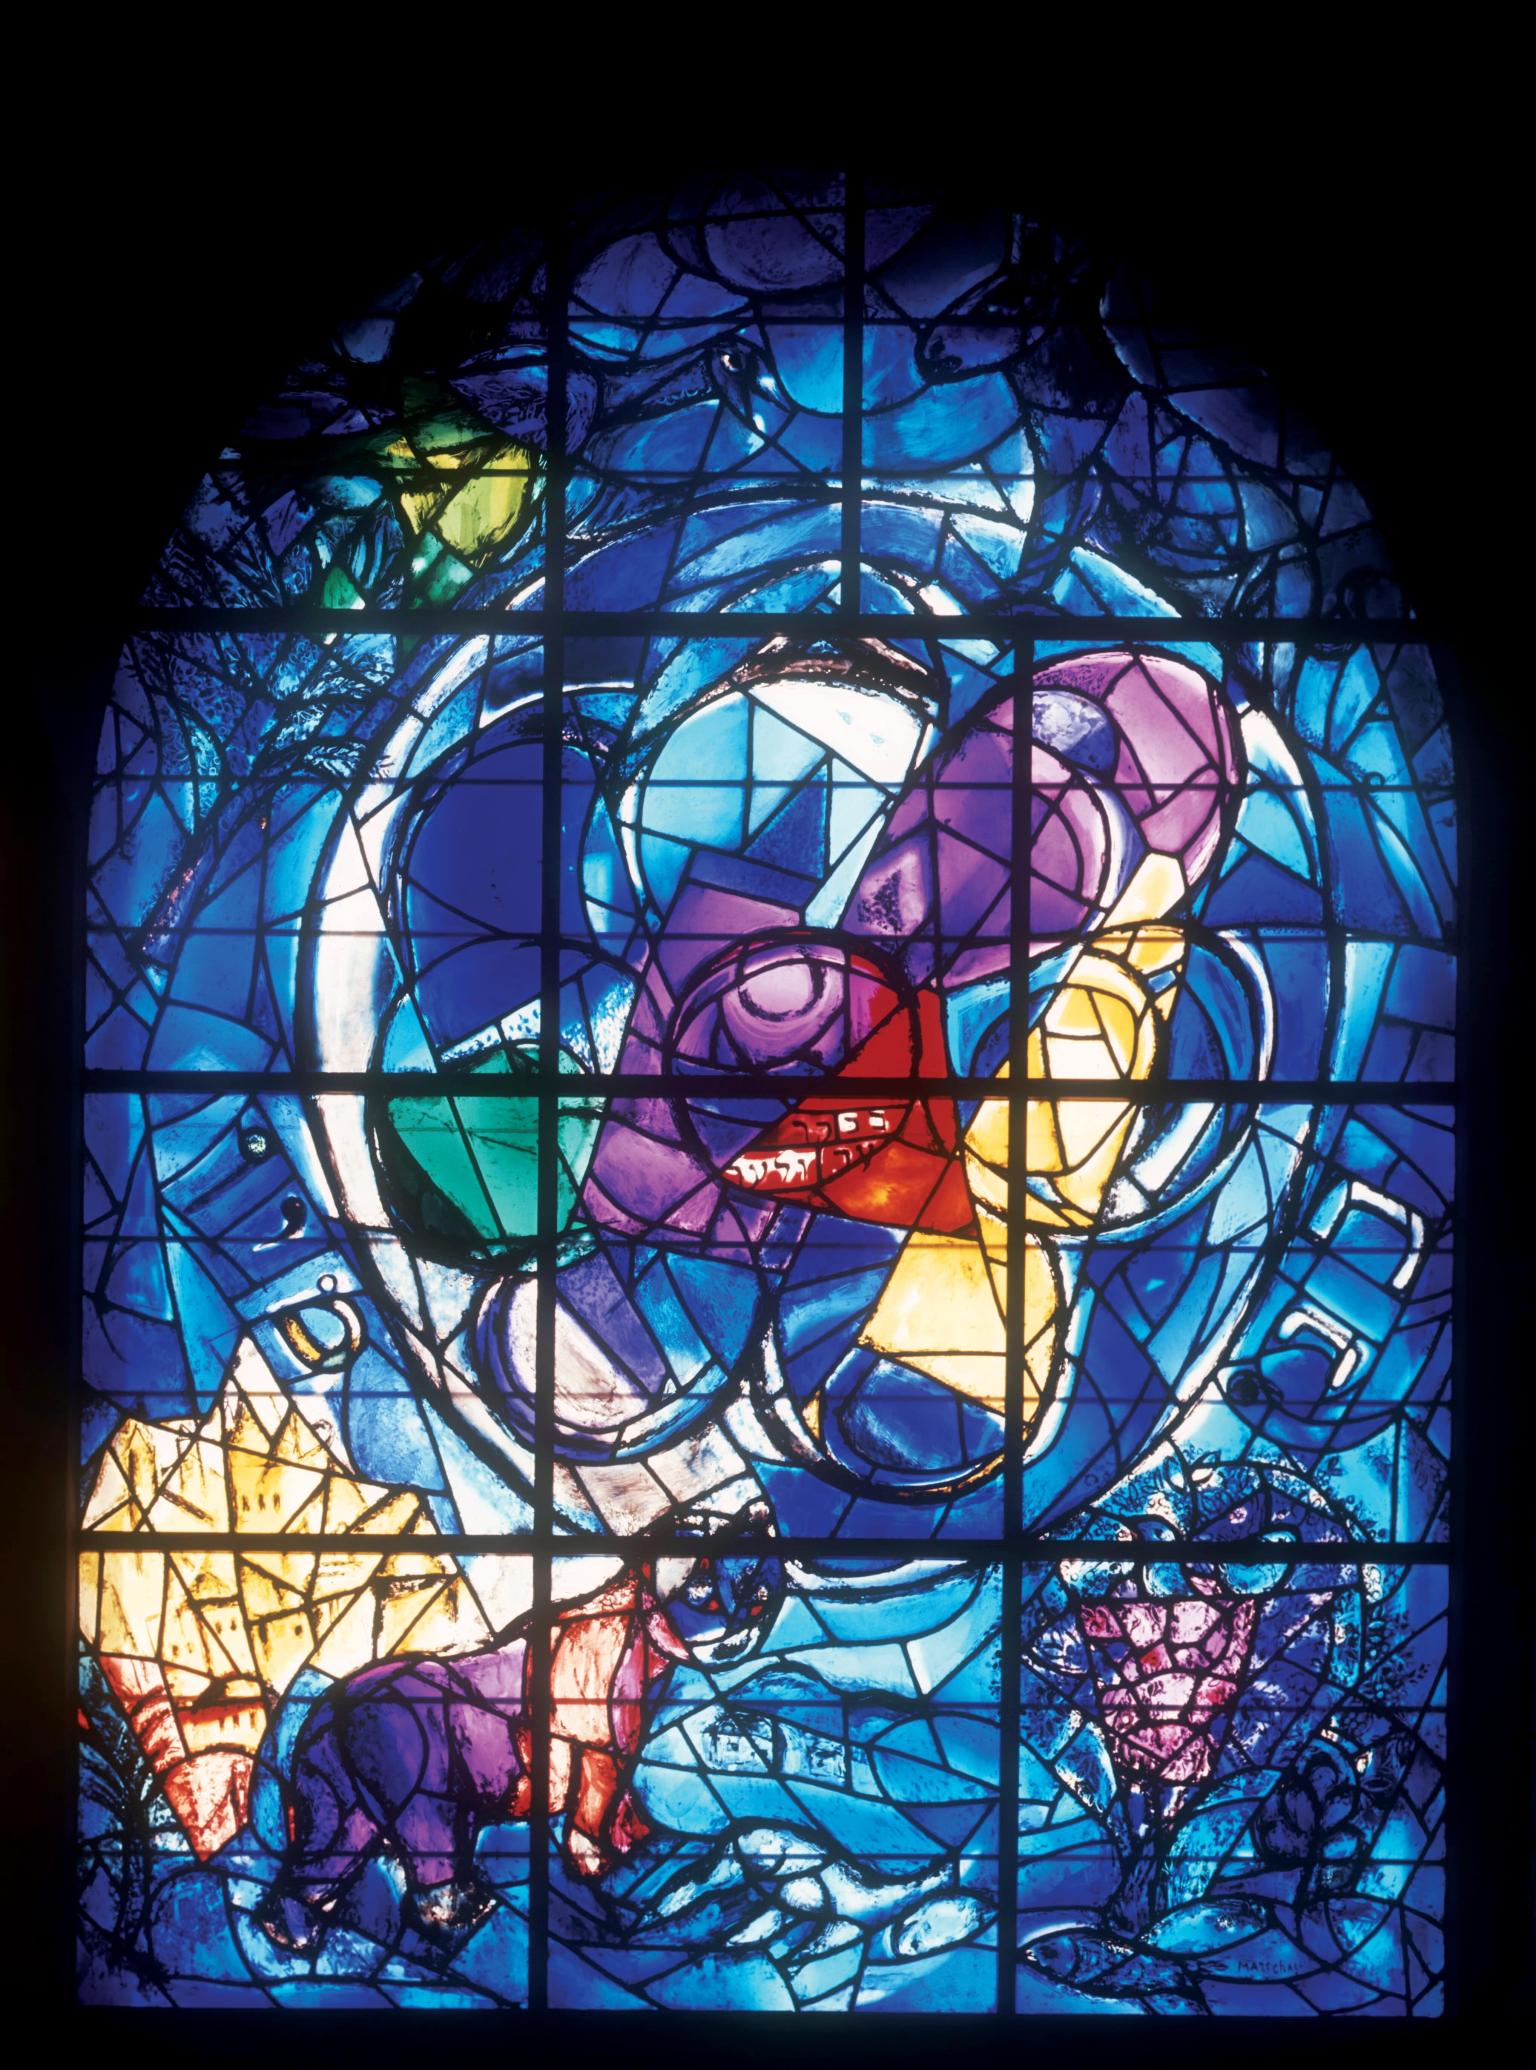 Stained glass window featuring large circle in center and a wolf in bottom right corner devouring prey.